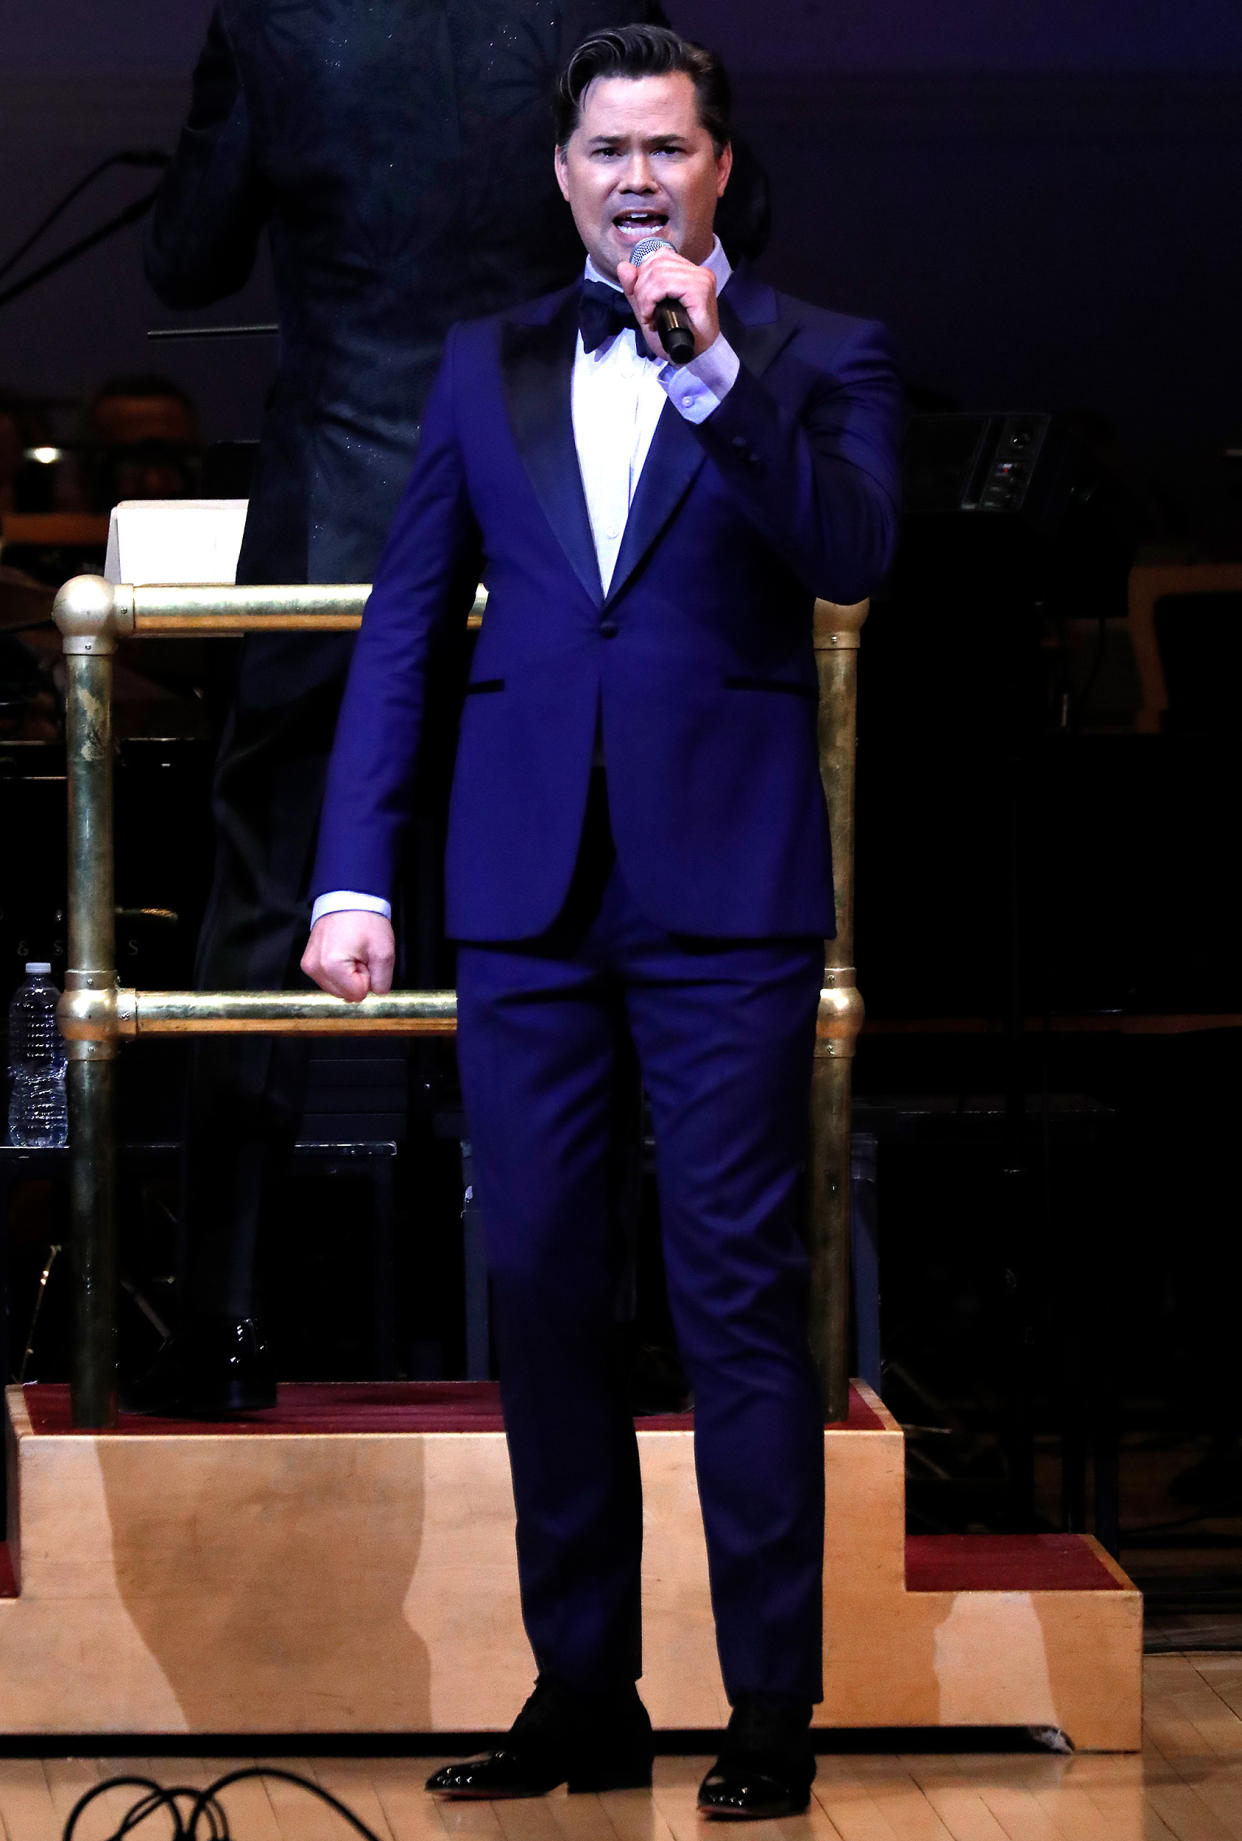 Andrew Rannells performs during the New York Pops 39th Birthday Gala at Carnegie Hall on April 25, 2022 in New York City. (Photo by John Lamparski/Getty Images) (John Lamparski / Getty Images)